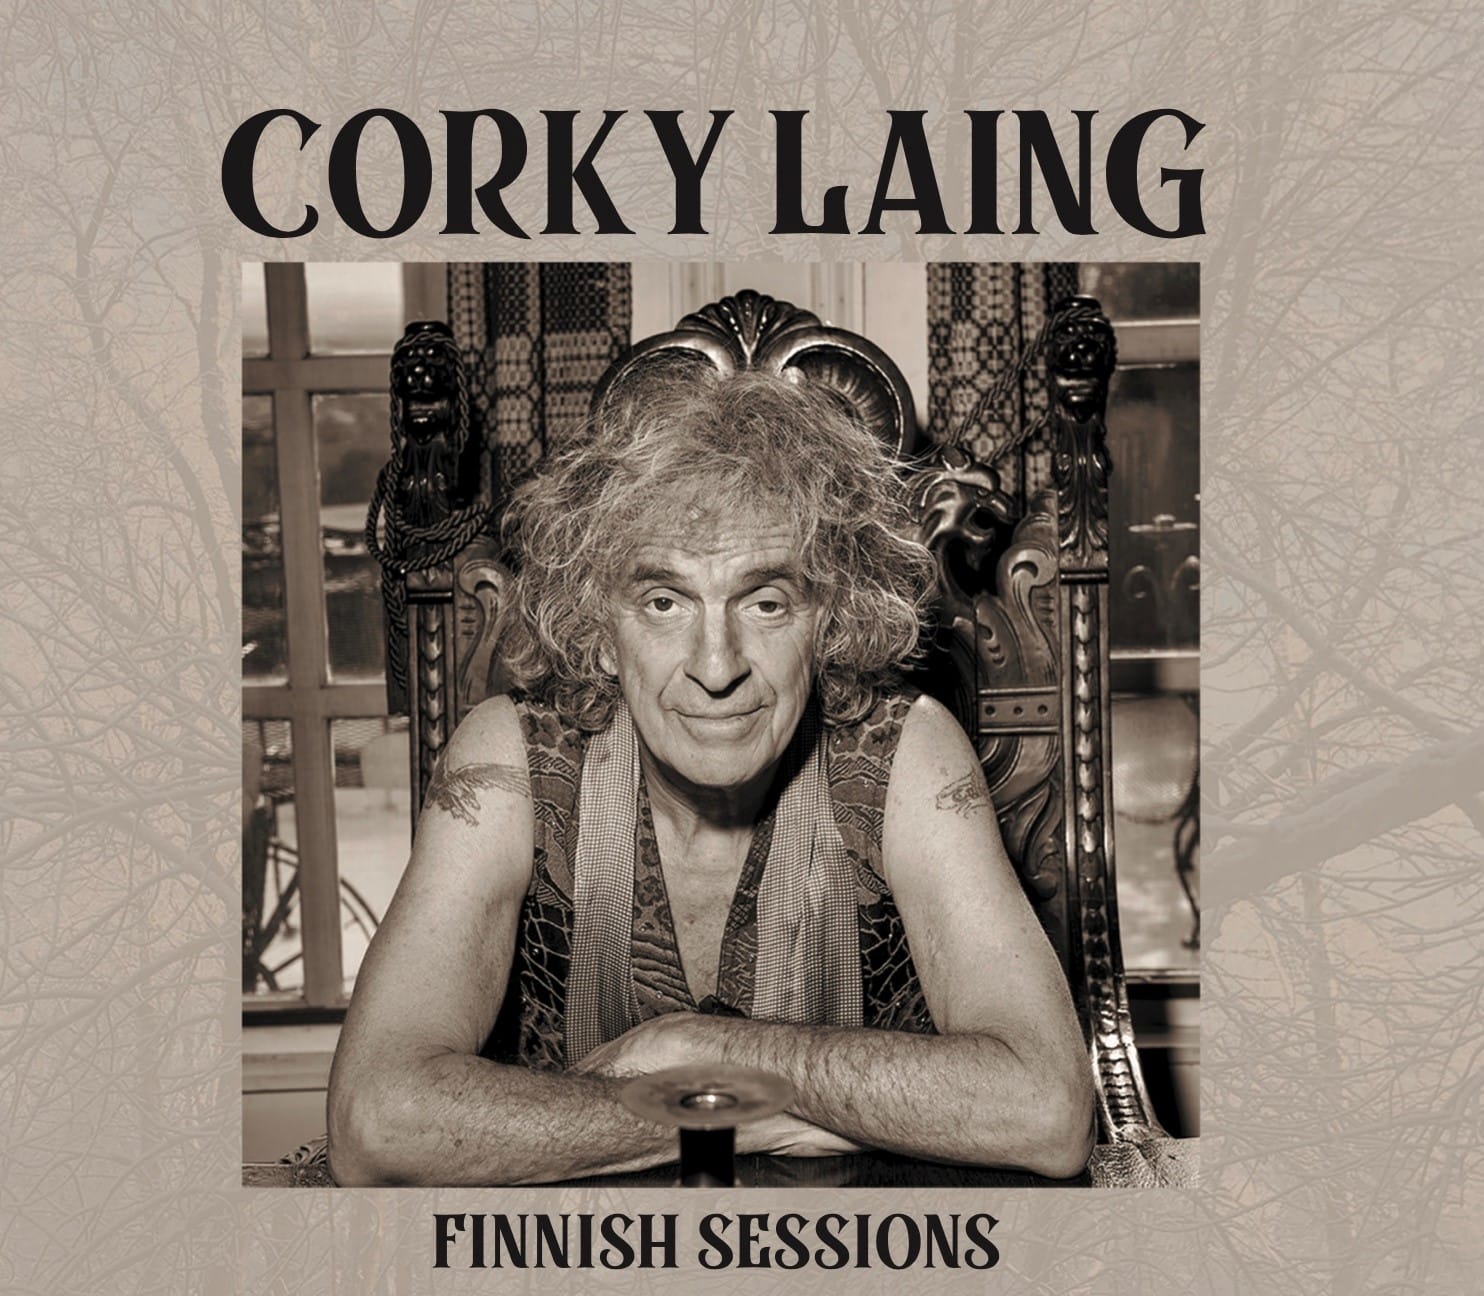 Corky Laing - Finnish Sessions